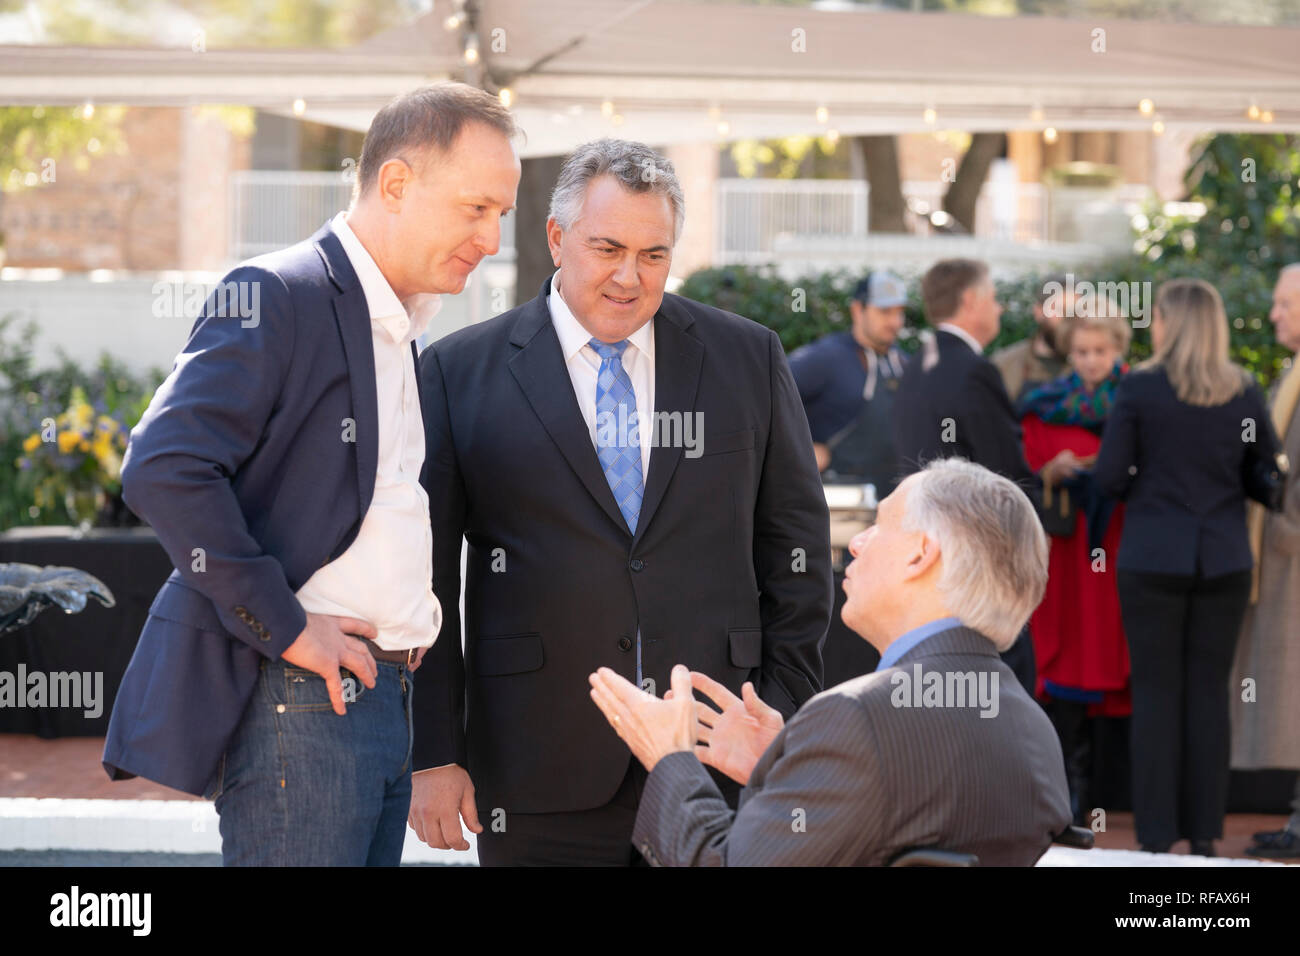 Joe Hockey, center, Australian ambassador to the United States and Austin, Texas, businessman James Messer, left, visit with Texas Gov. Greg Abbott during the Great Mates Australia-Texas Barbecue at the Governor's Mansion in Austin. Abbott and Hockey worked to strengthen ties between the allies discussing agriculture and high tech before eating Australian Vegemite burnt ends and HeartBrand Akaushi beef. Stock Photo